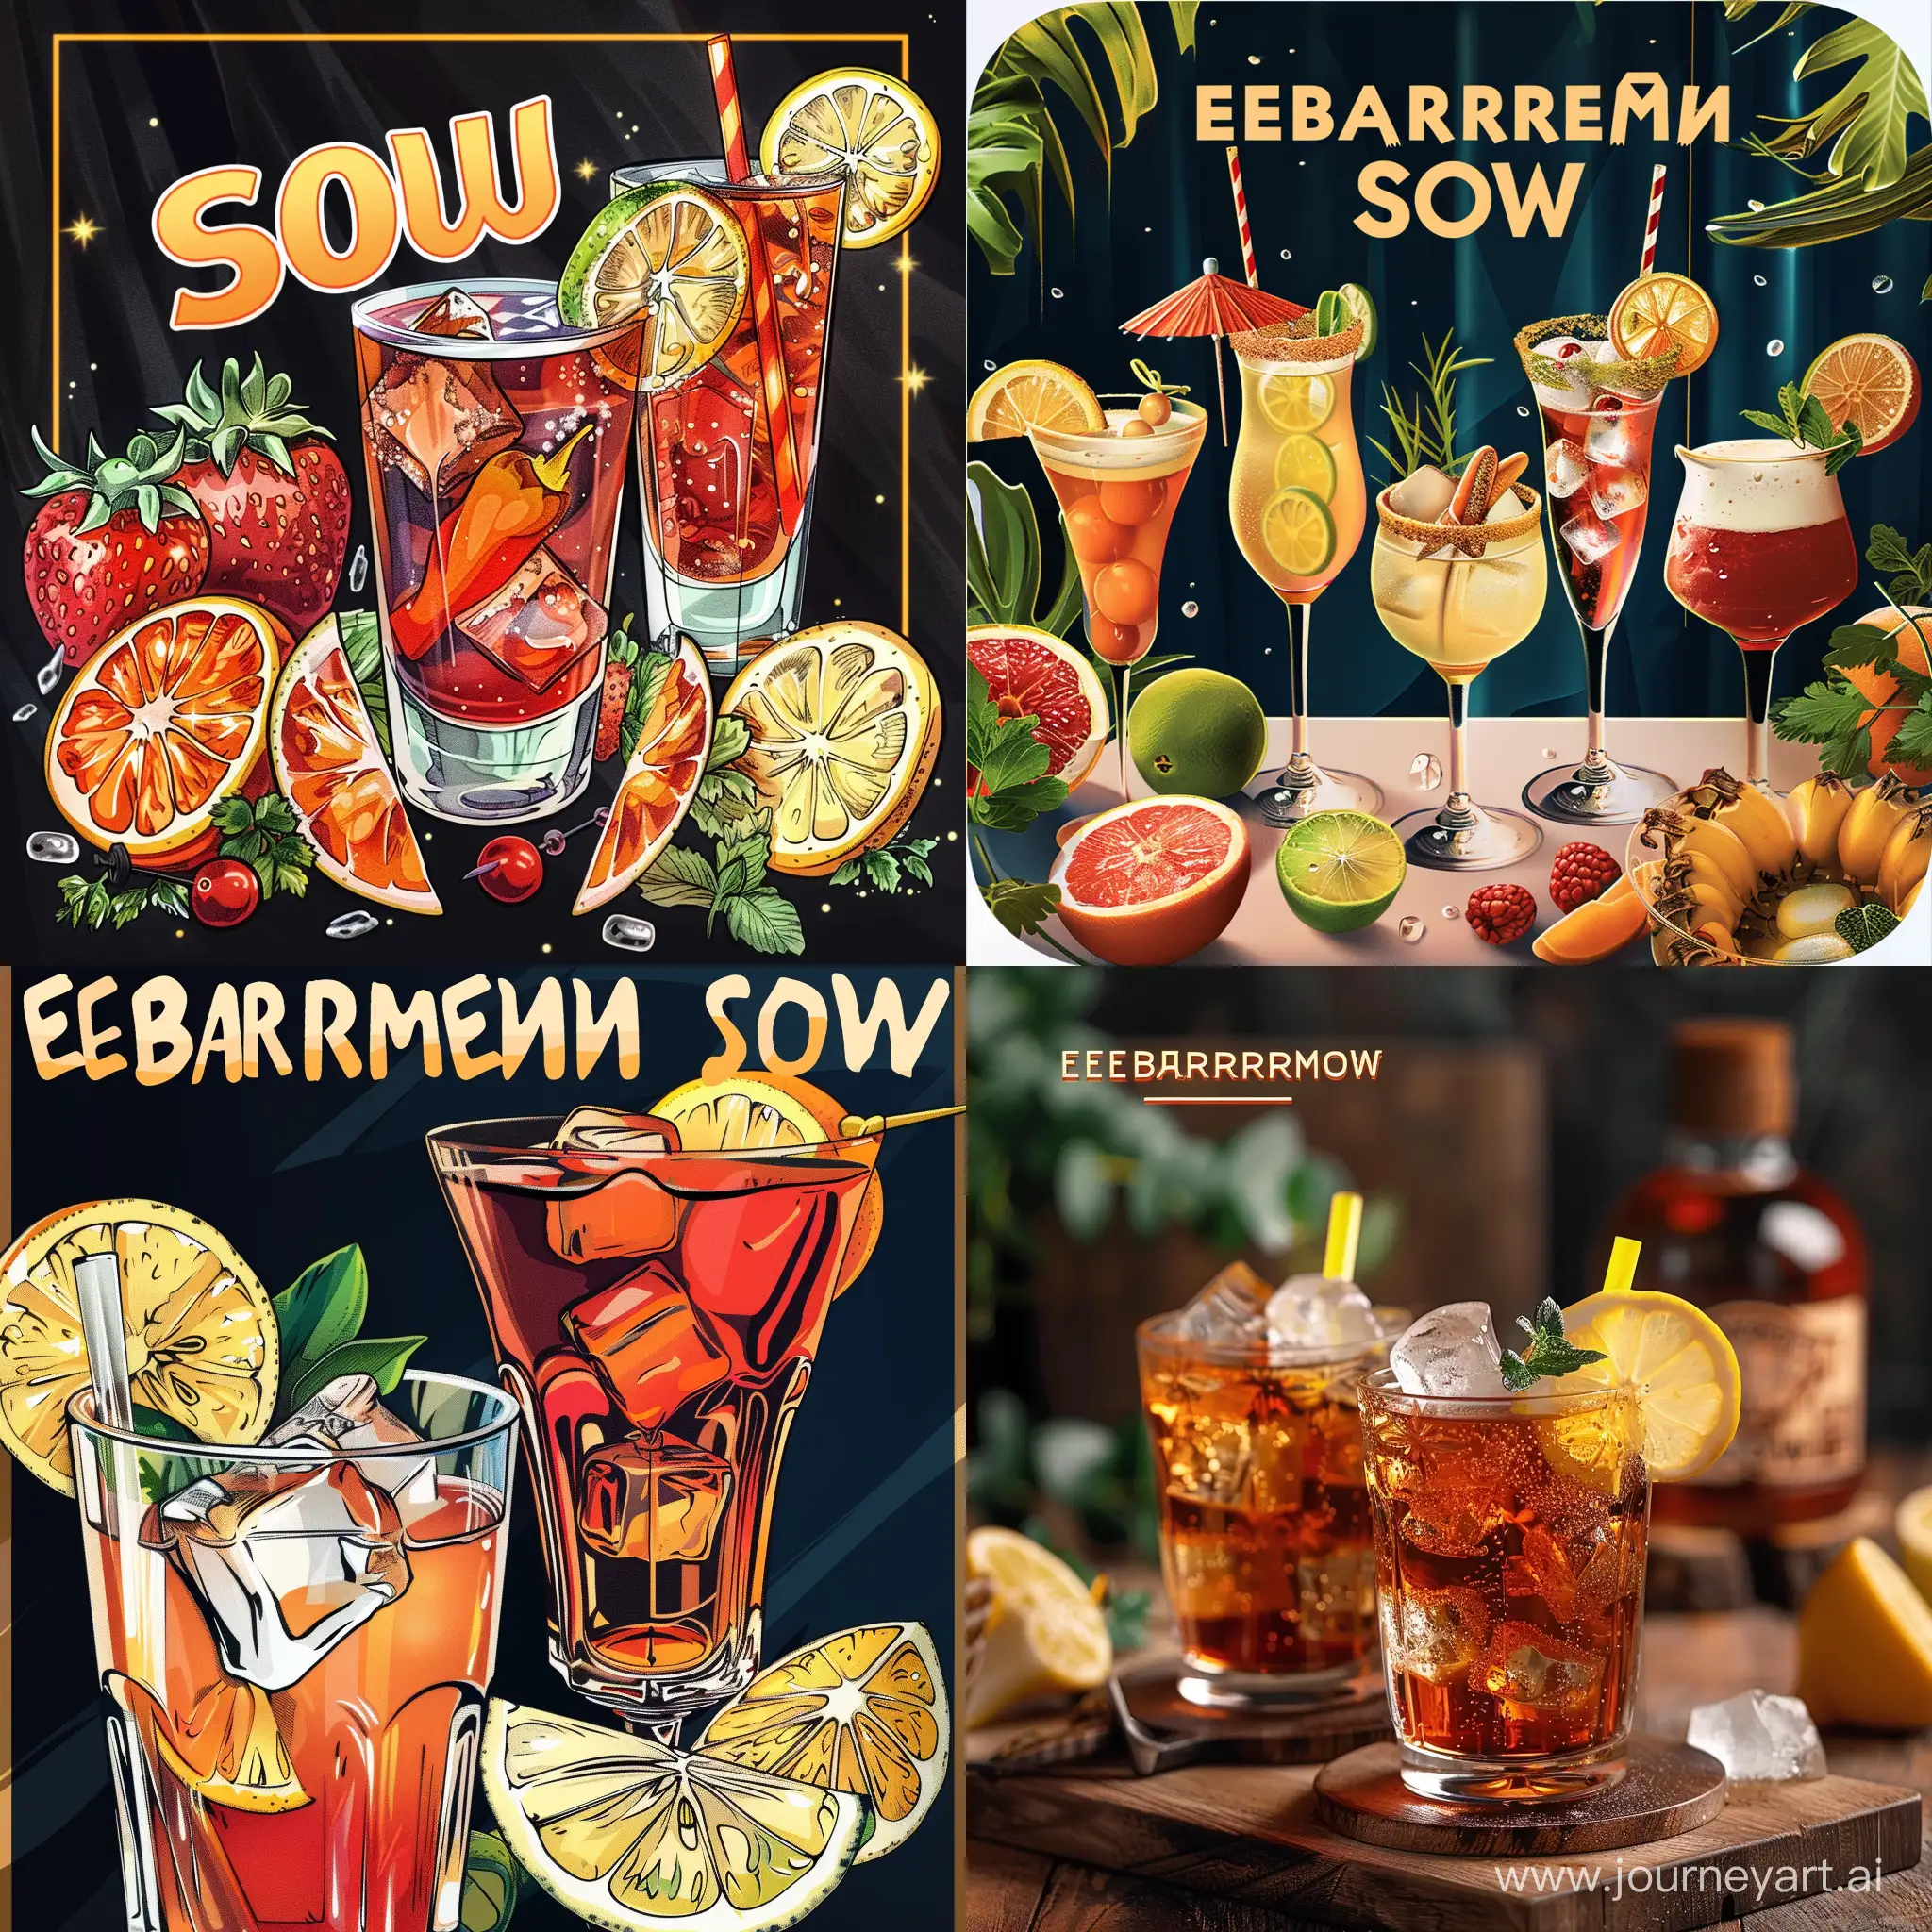 A YouTube channel cover for a page that demonstrates the art of making various cocktails. The channel is called "НеБармен Show"
